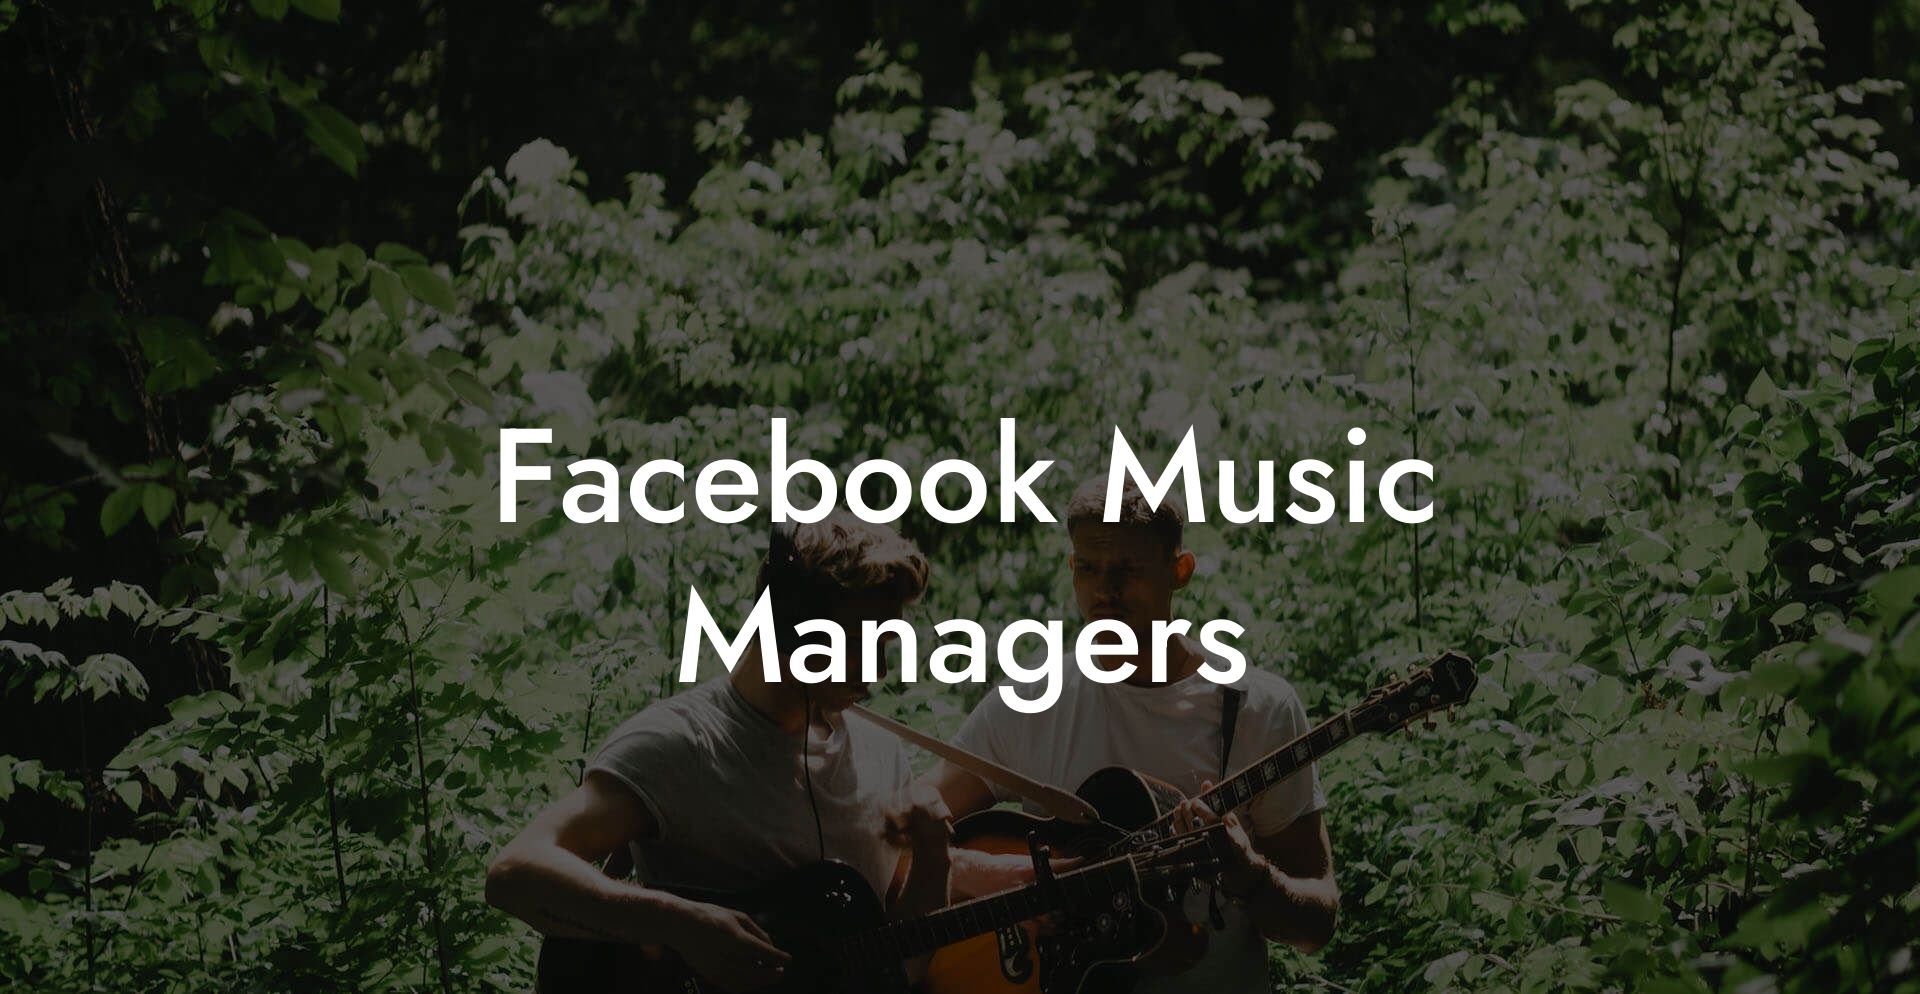 Facebook Music Managers